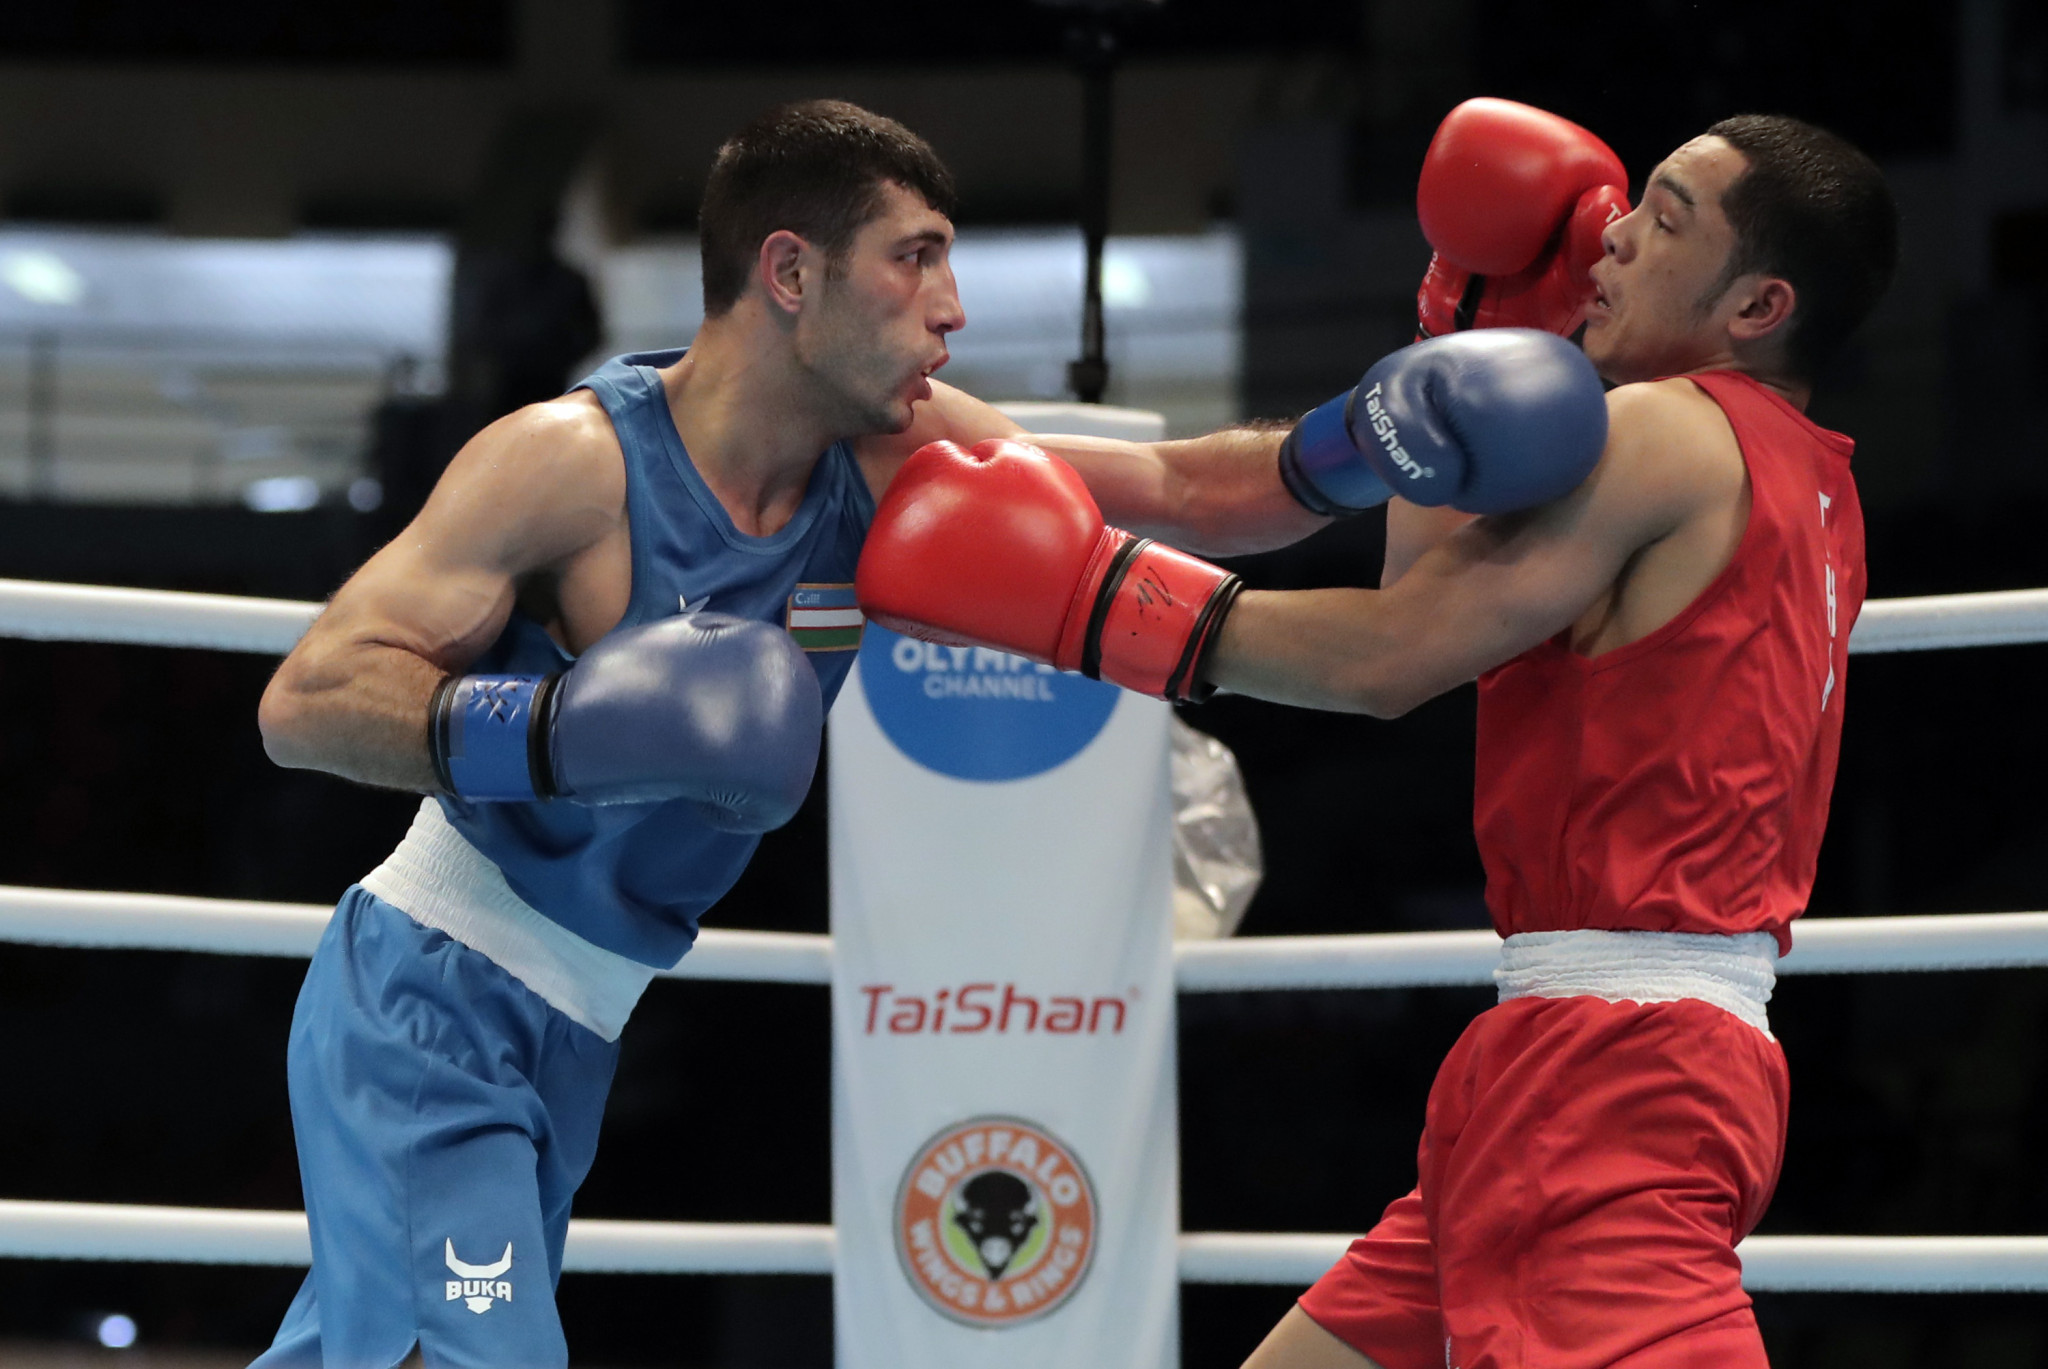 Rio 2016 champion Zoirov exits in last four at Asia-Oceania Olympic boxing qualifier